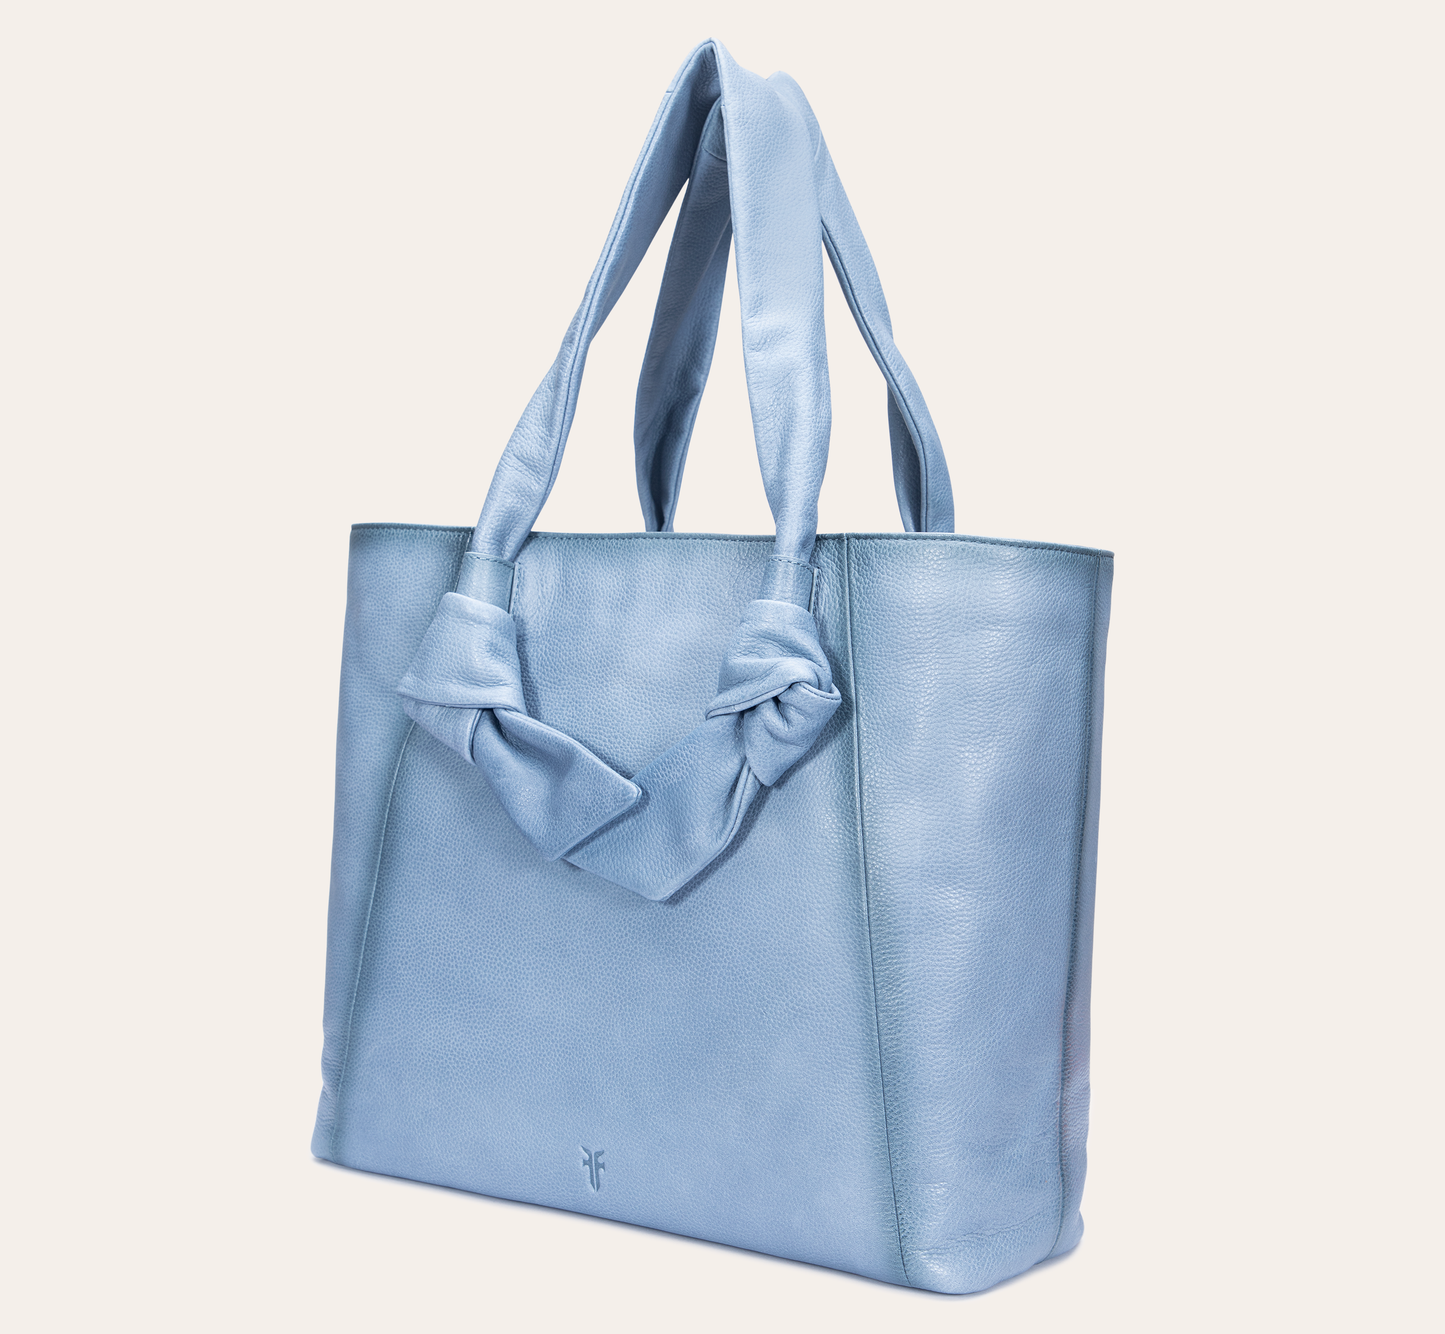 Nora Knotted Tote